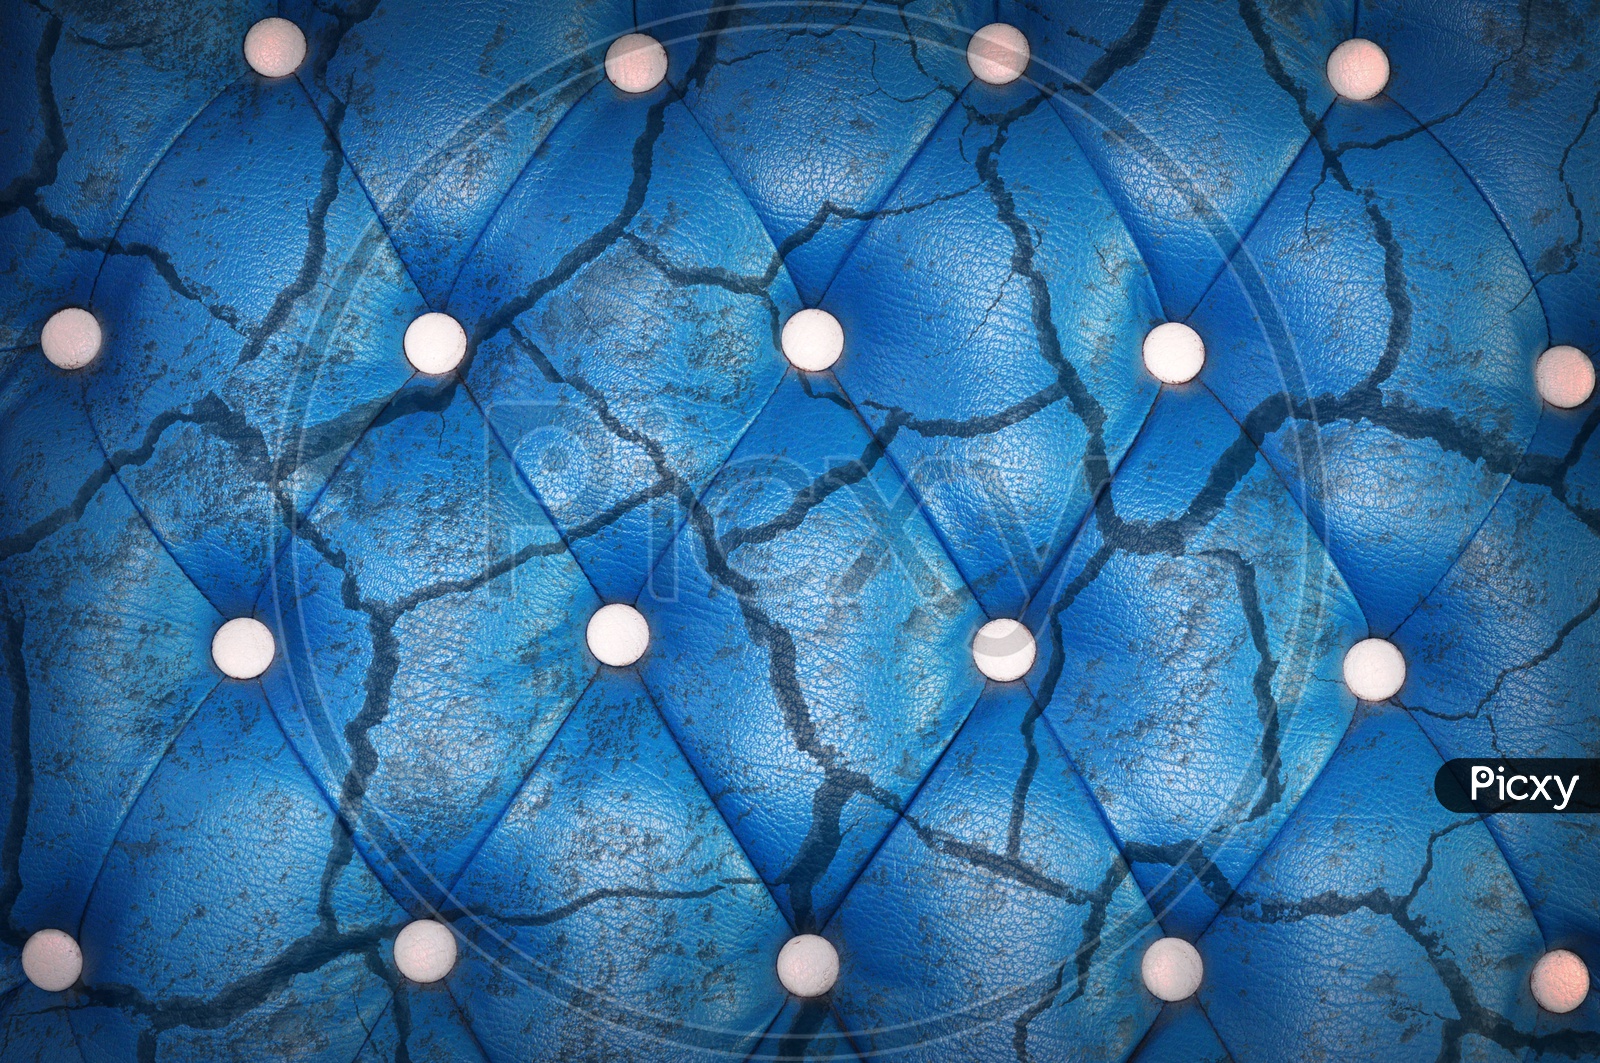 Texture of  Leather Sofa With Blue Colour Forming an Abstract Background